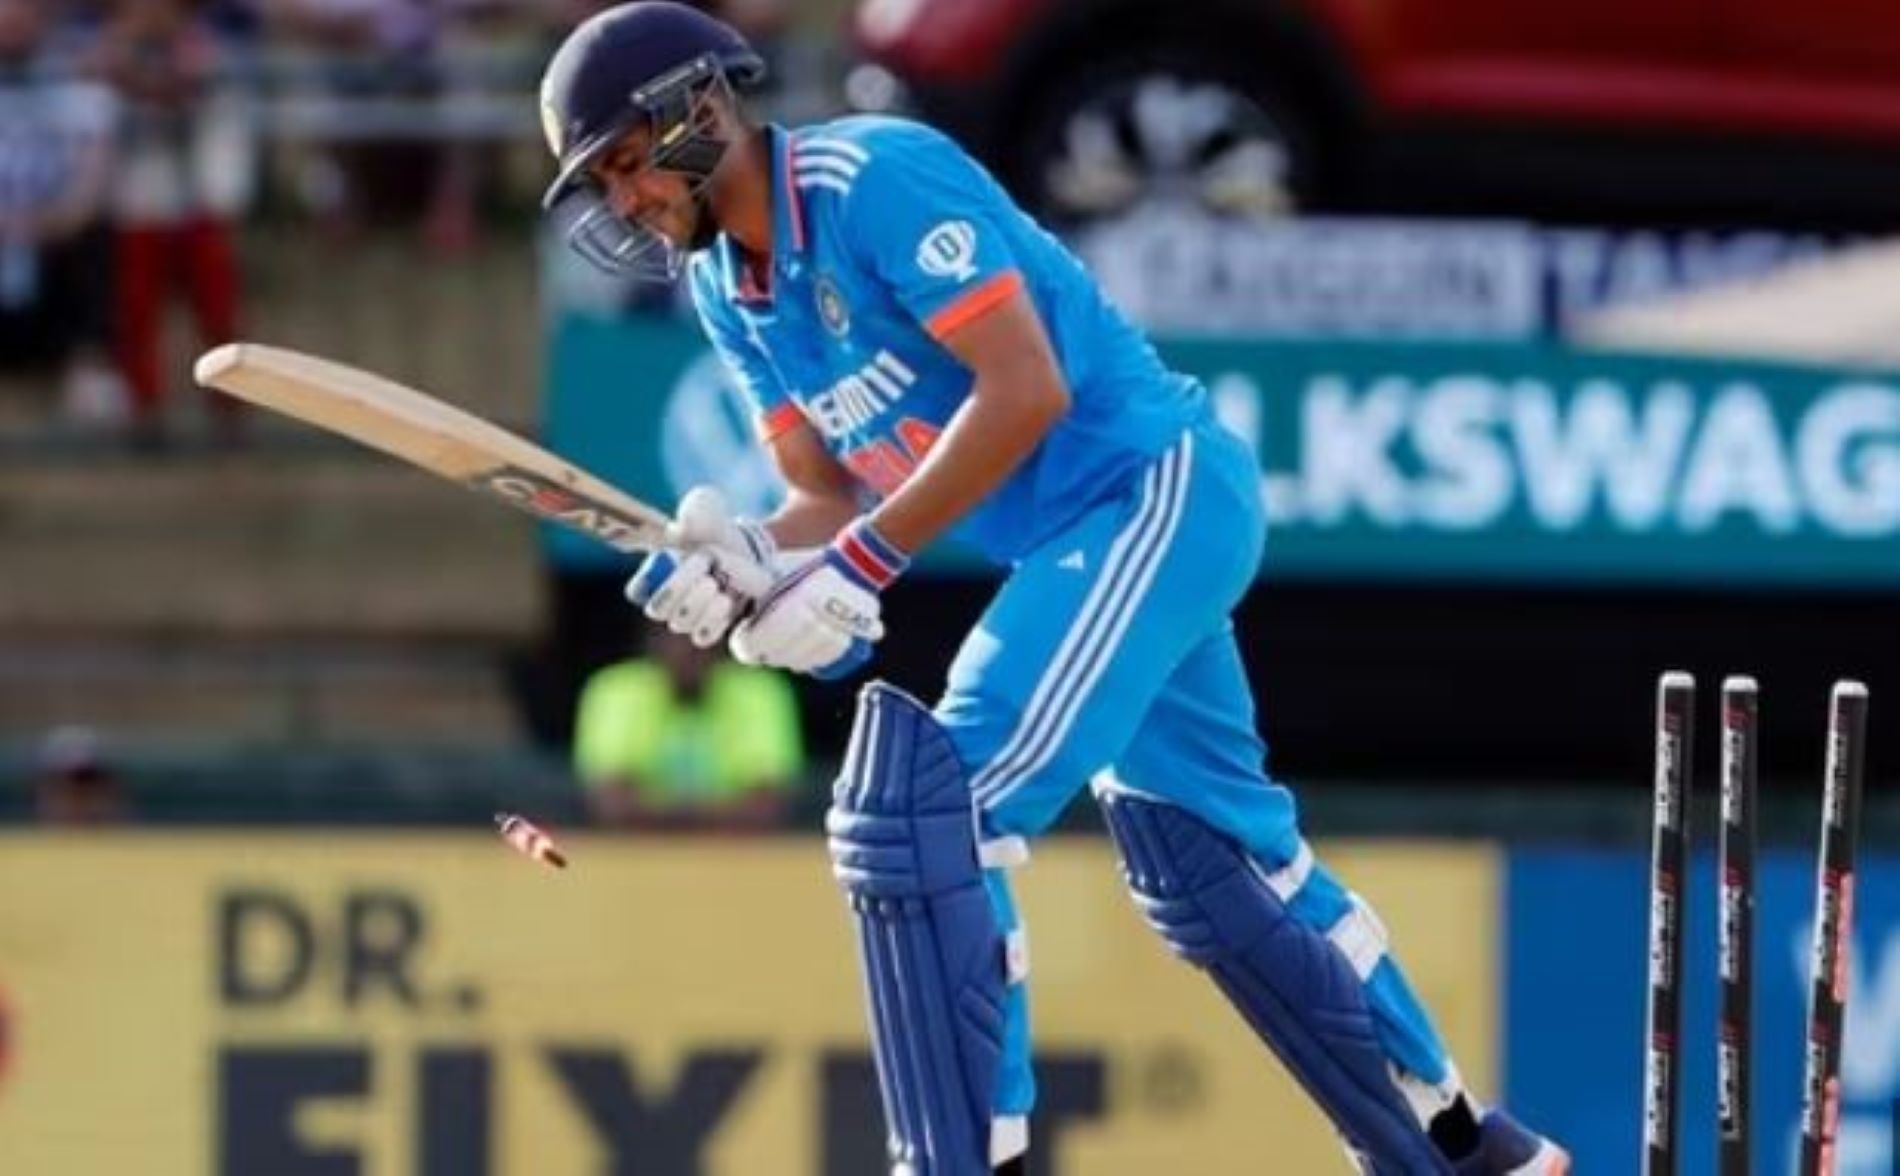 Shubman Gill endured a torturous stay at the crease last week against Pakistan